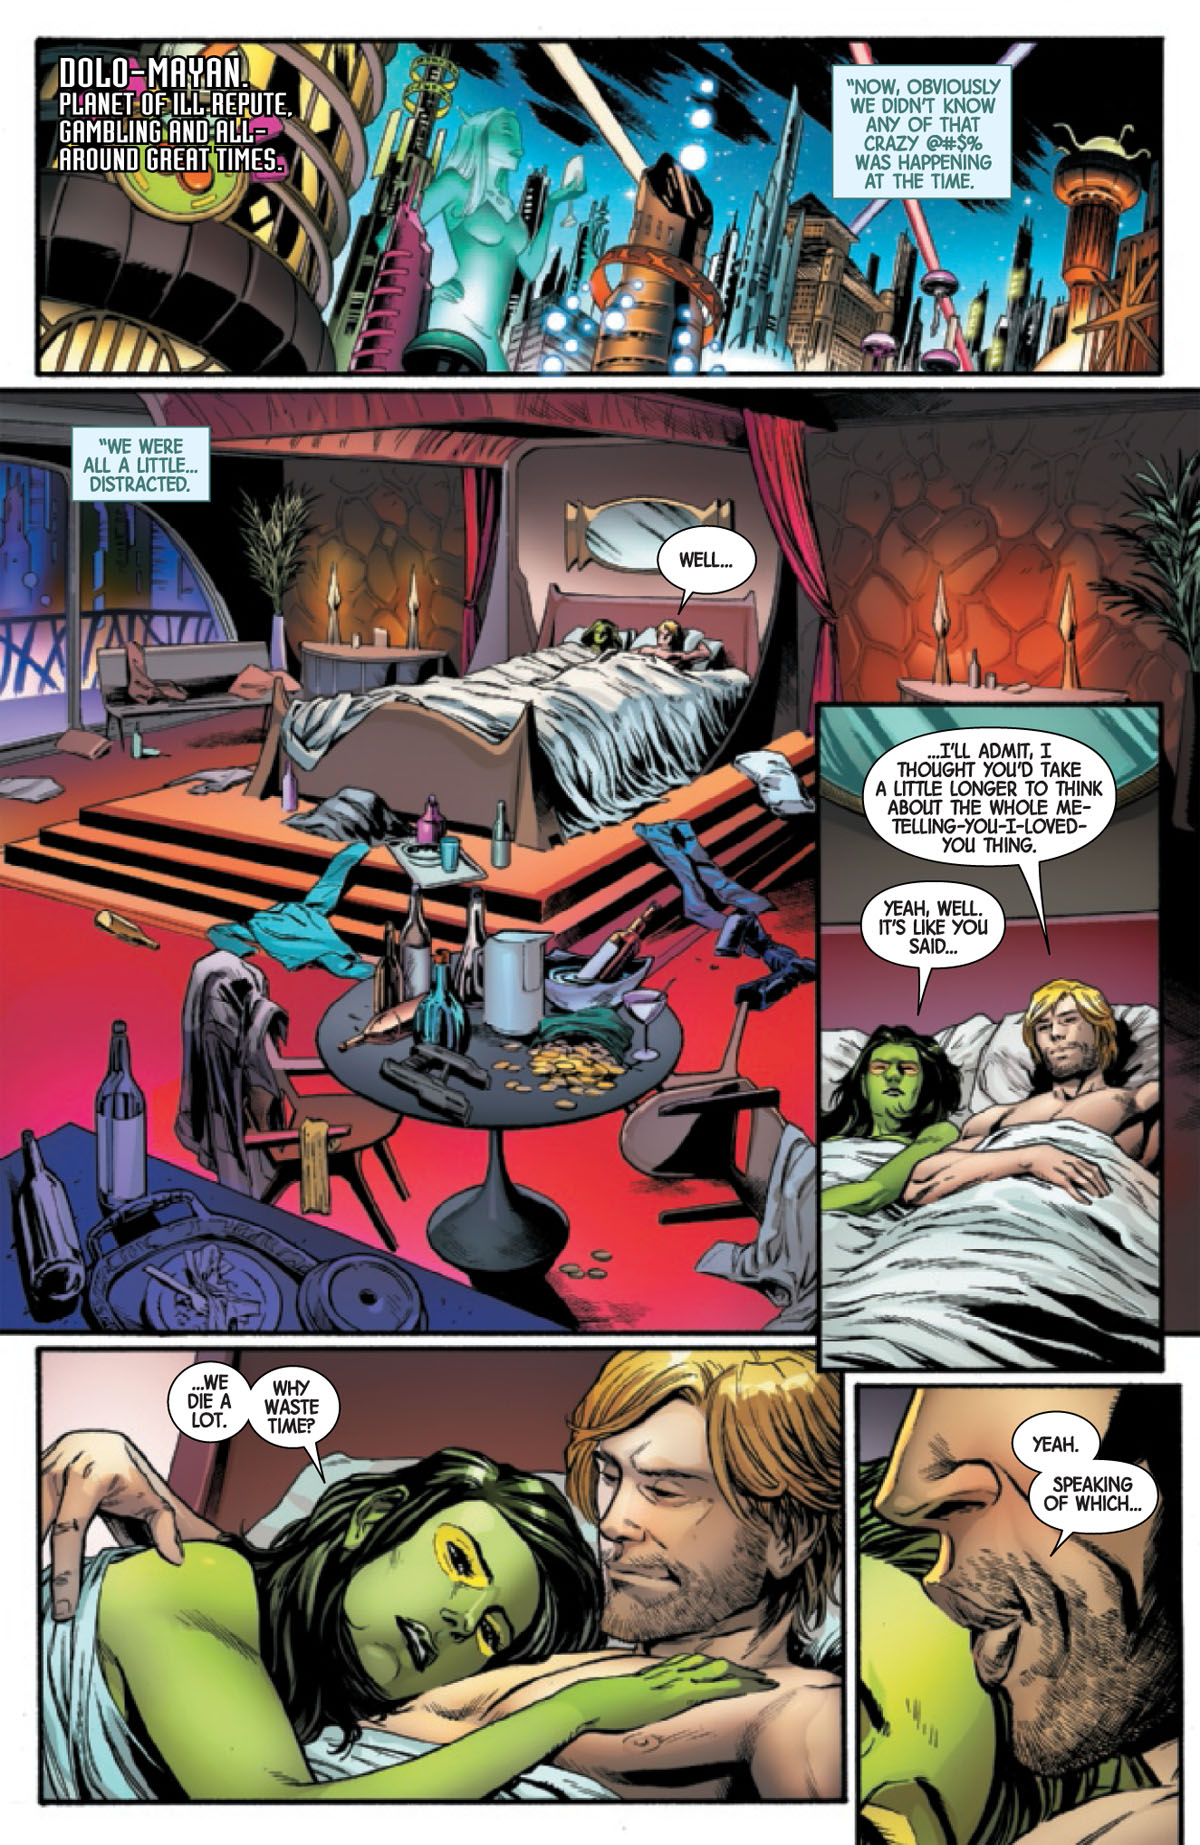 Guardians of the Galaxy #7 page 1